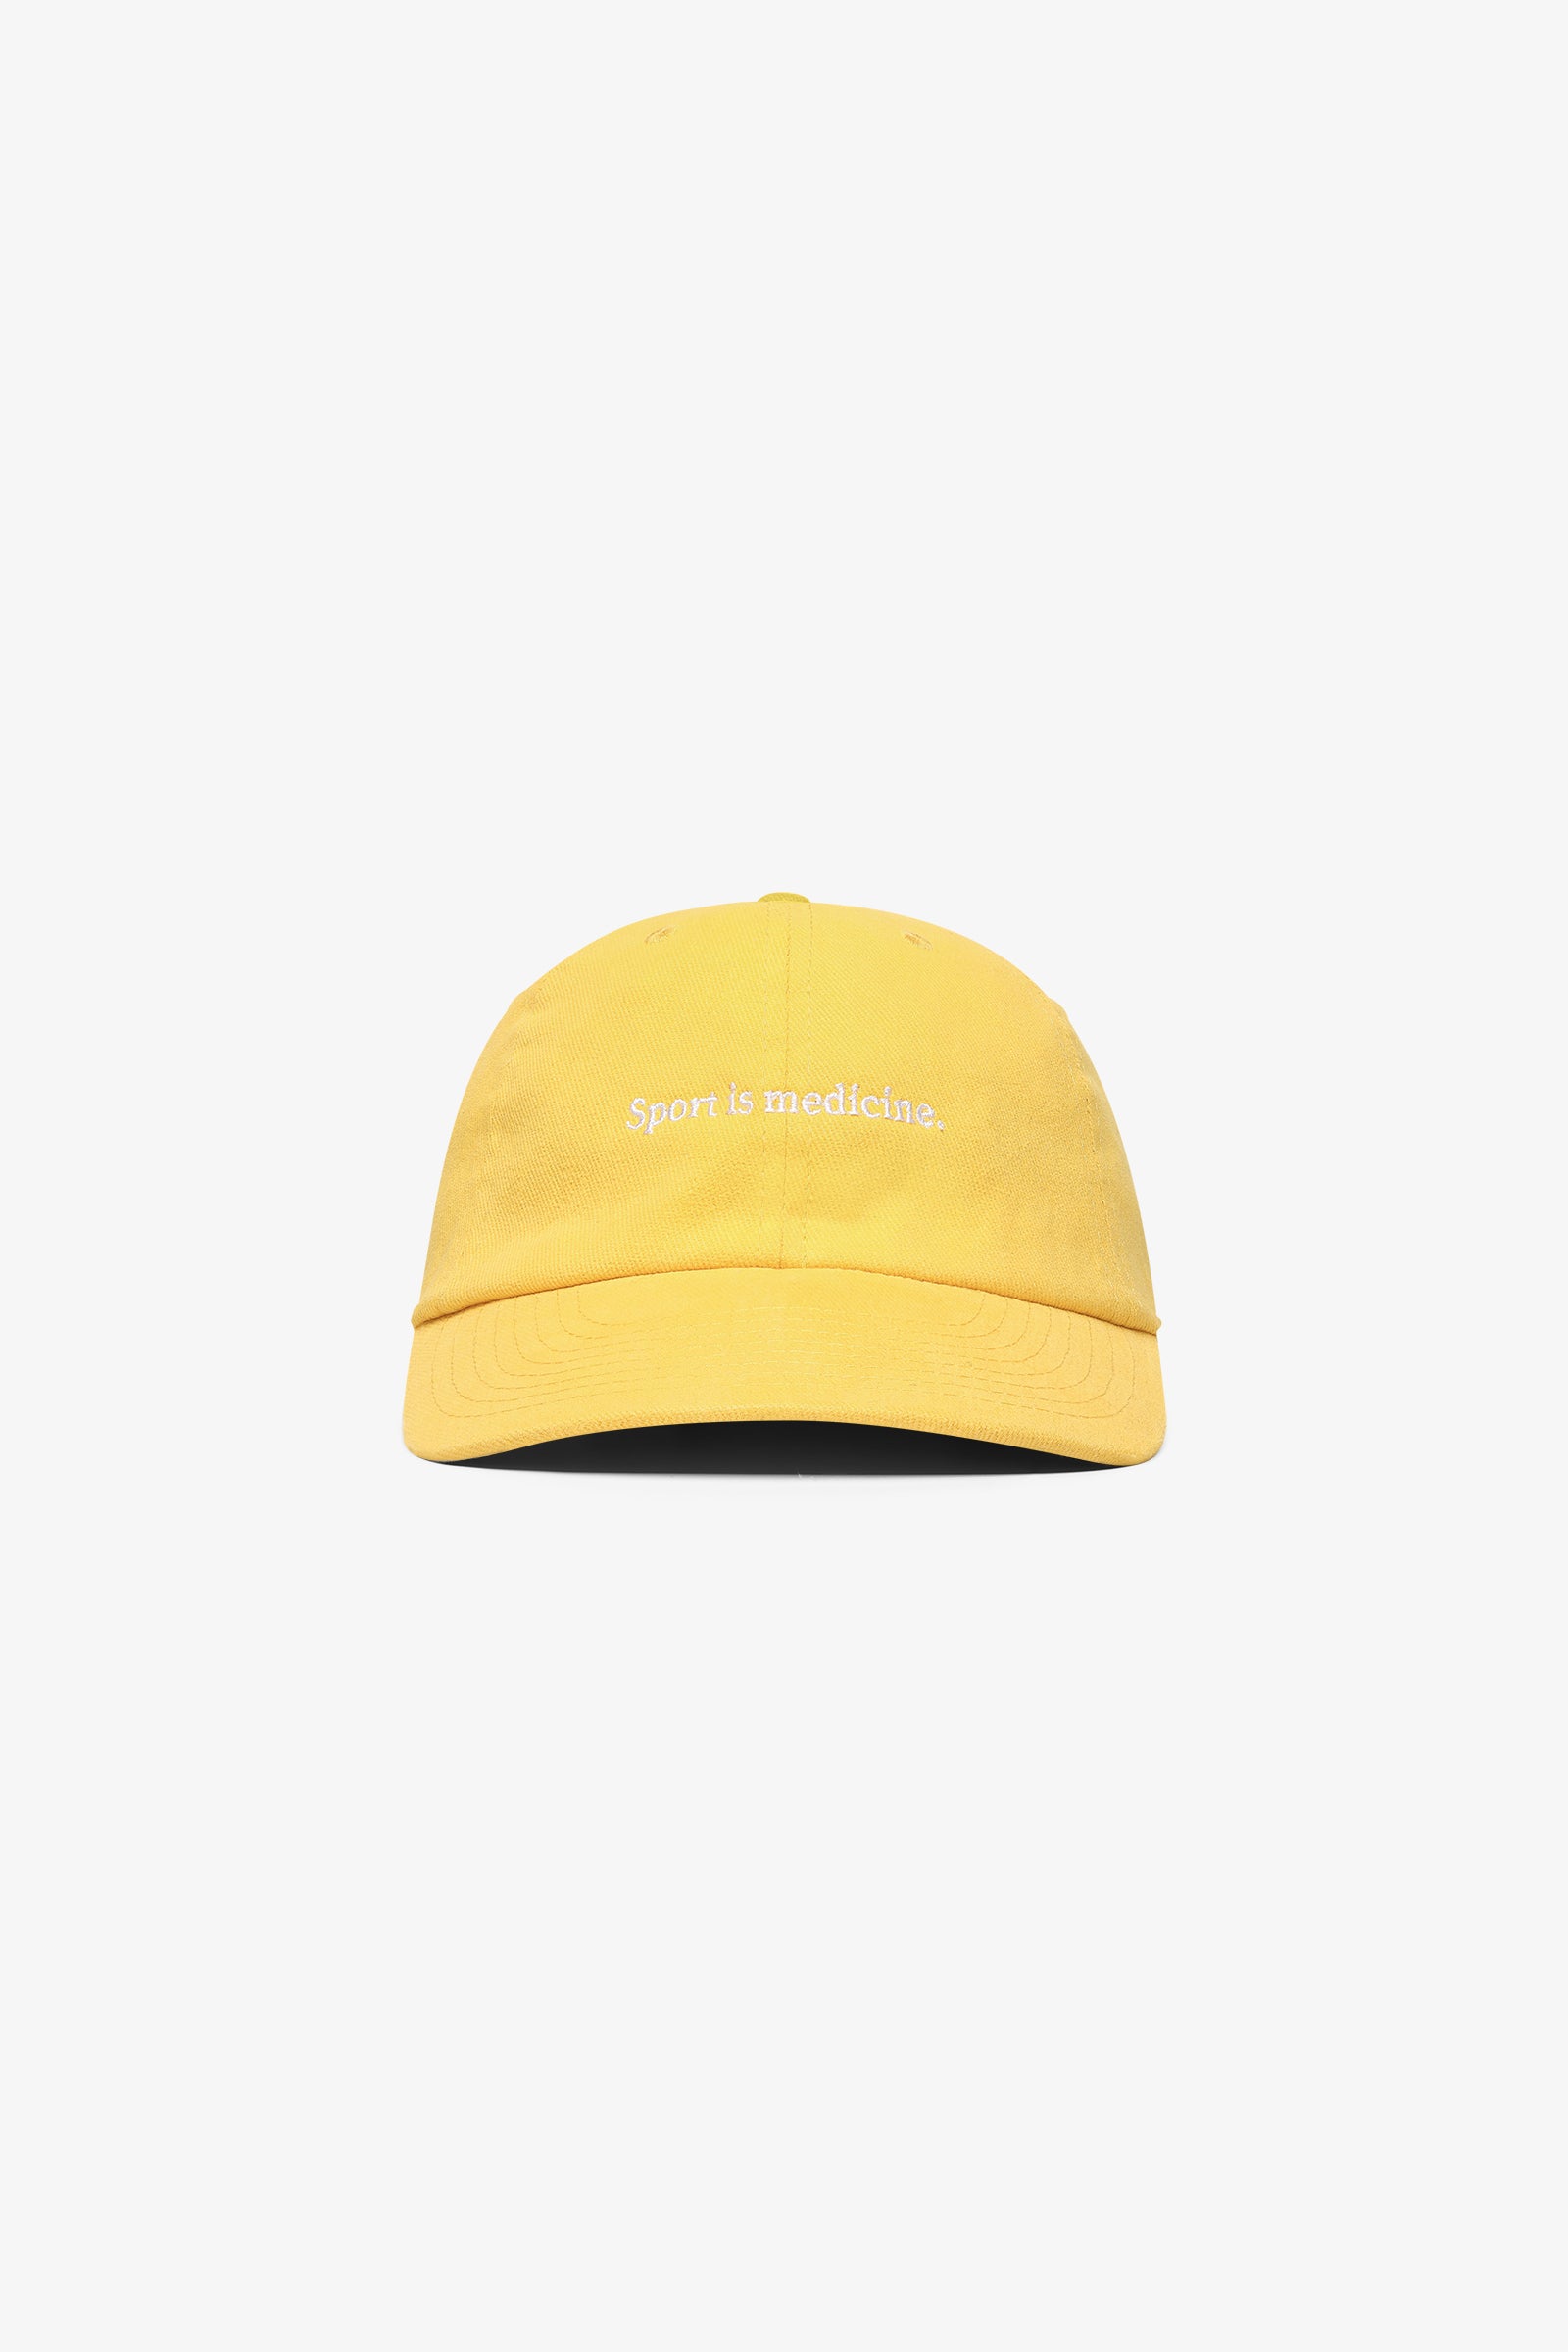 Sport is Medicine Brushed Hat / Canary Yellow